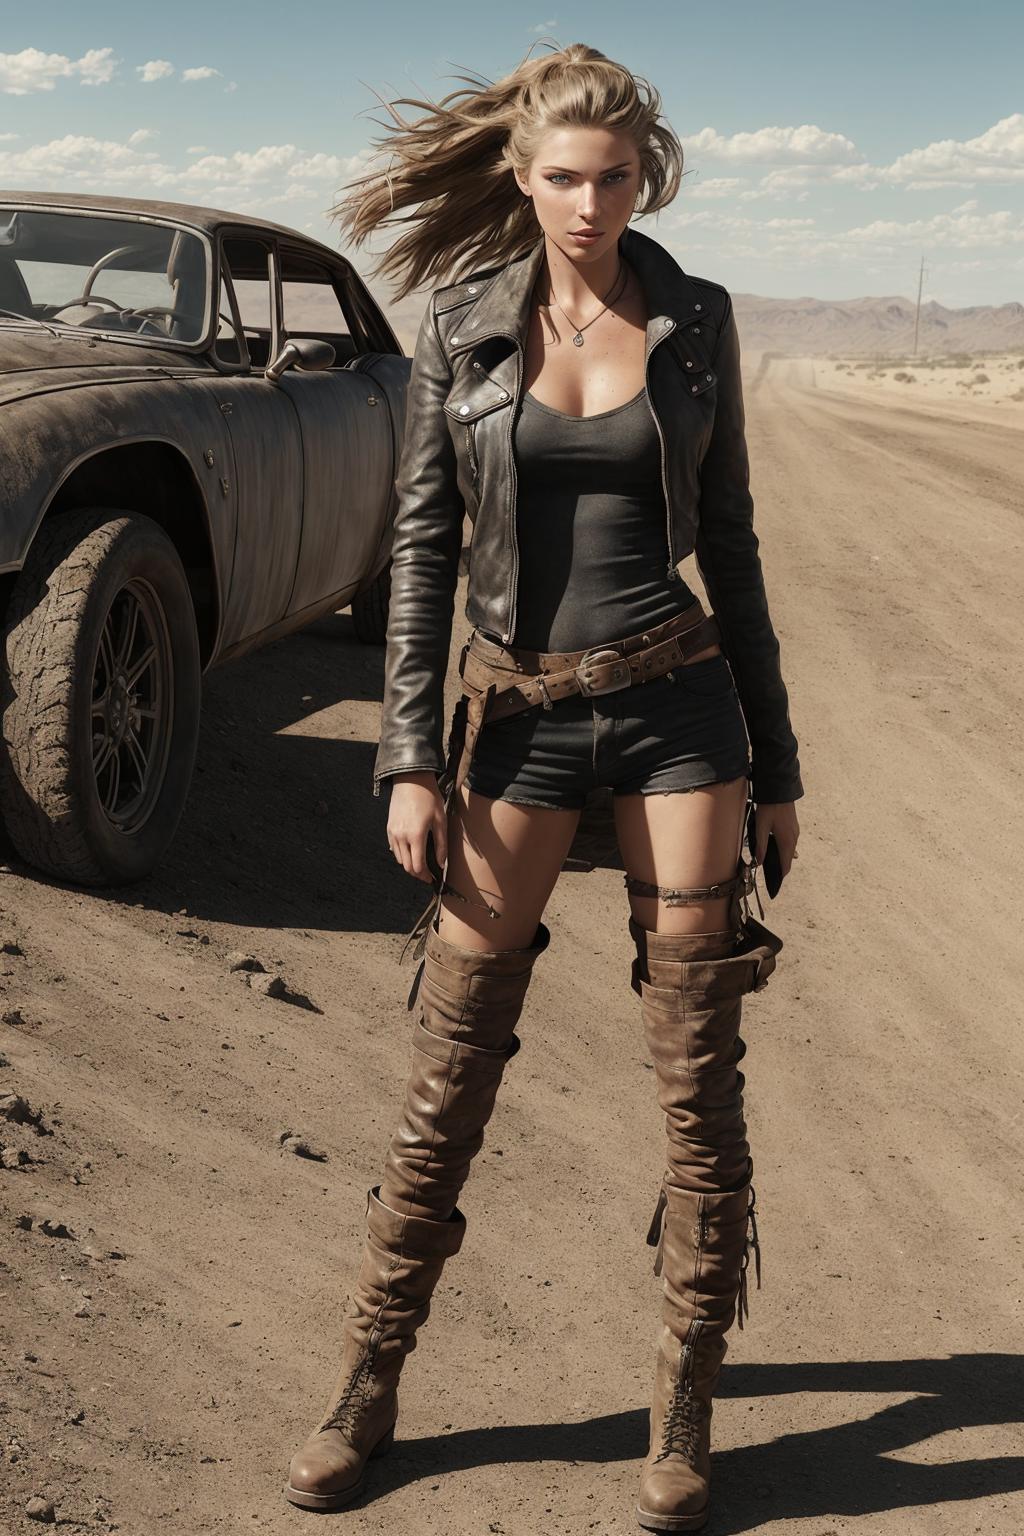 Woman in Leather Outfit and Boots Standing in Dirt.